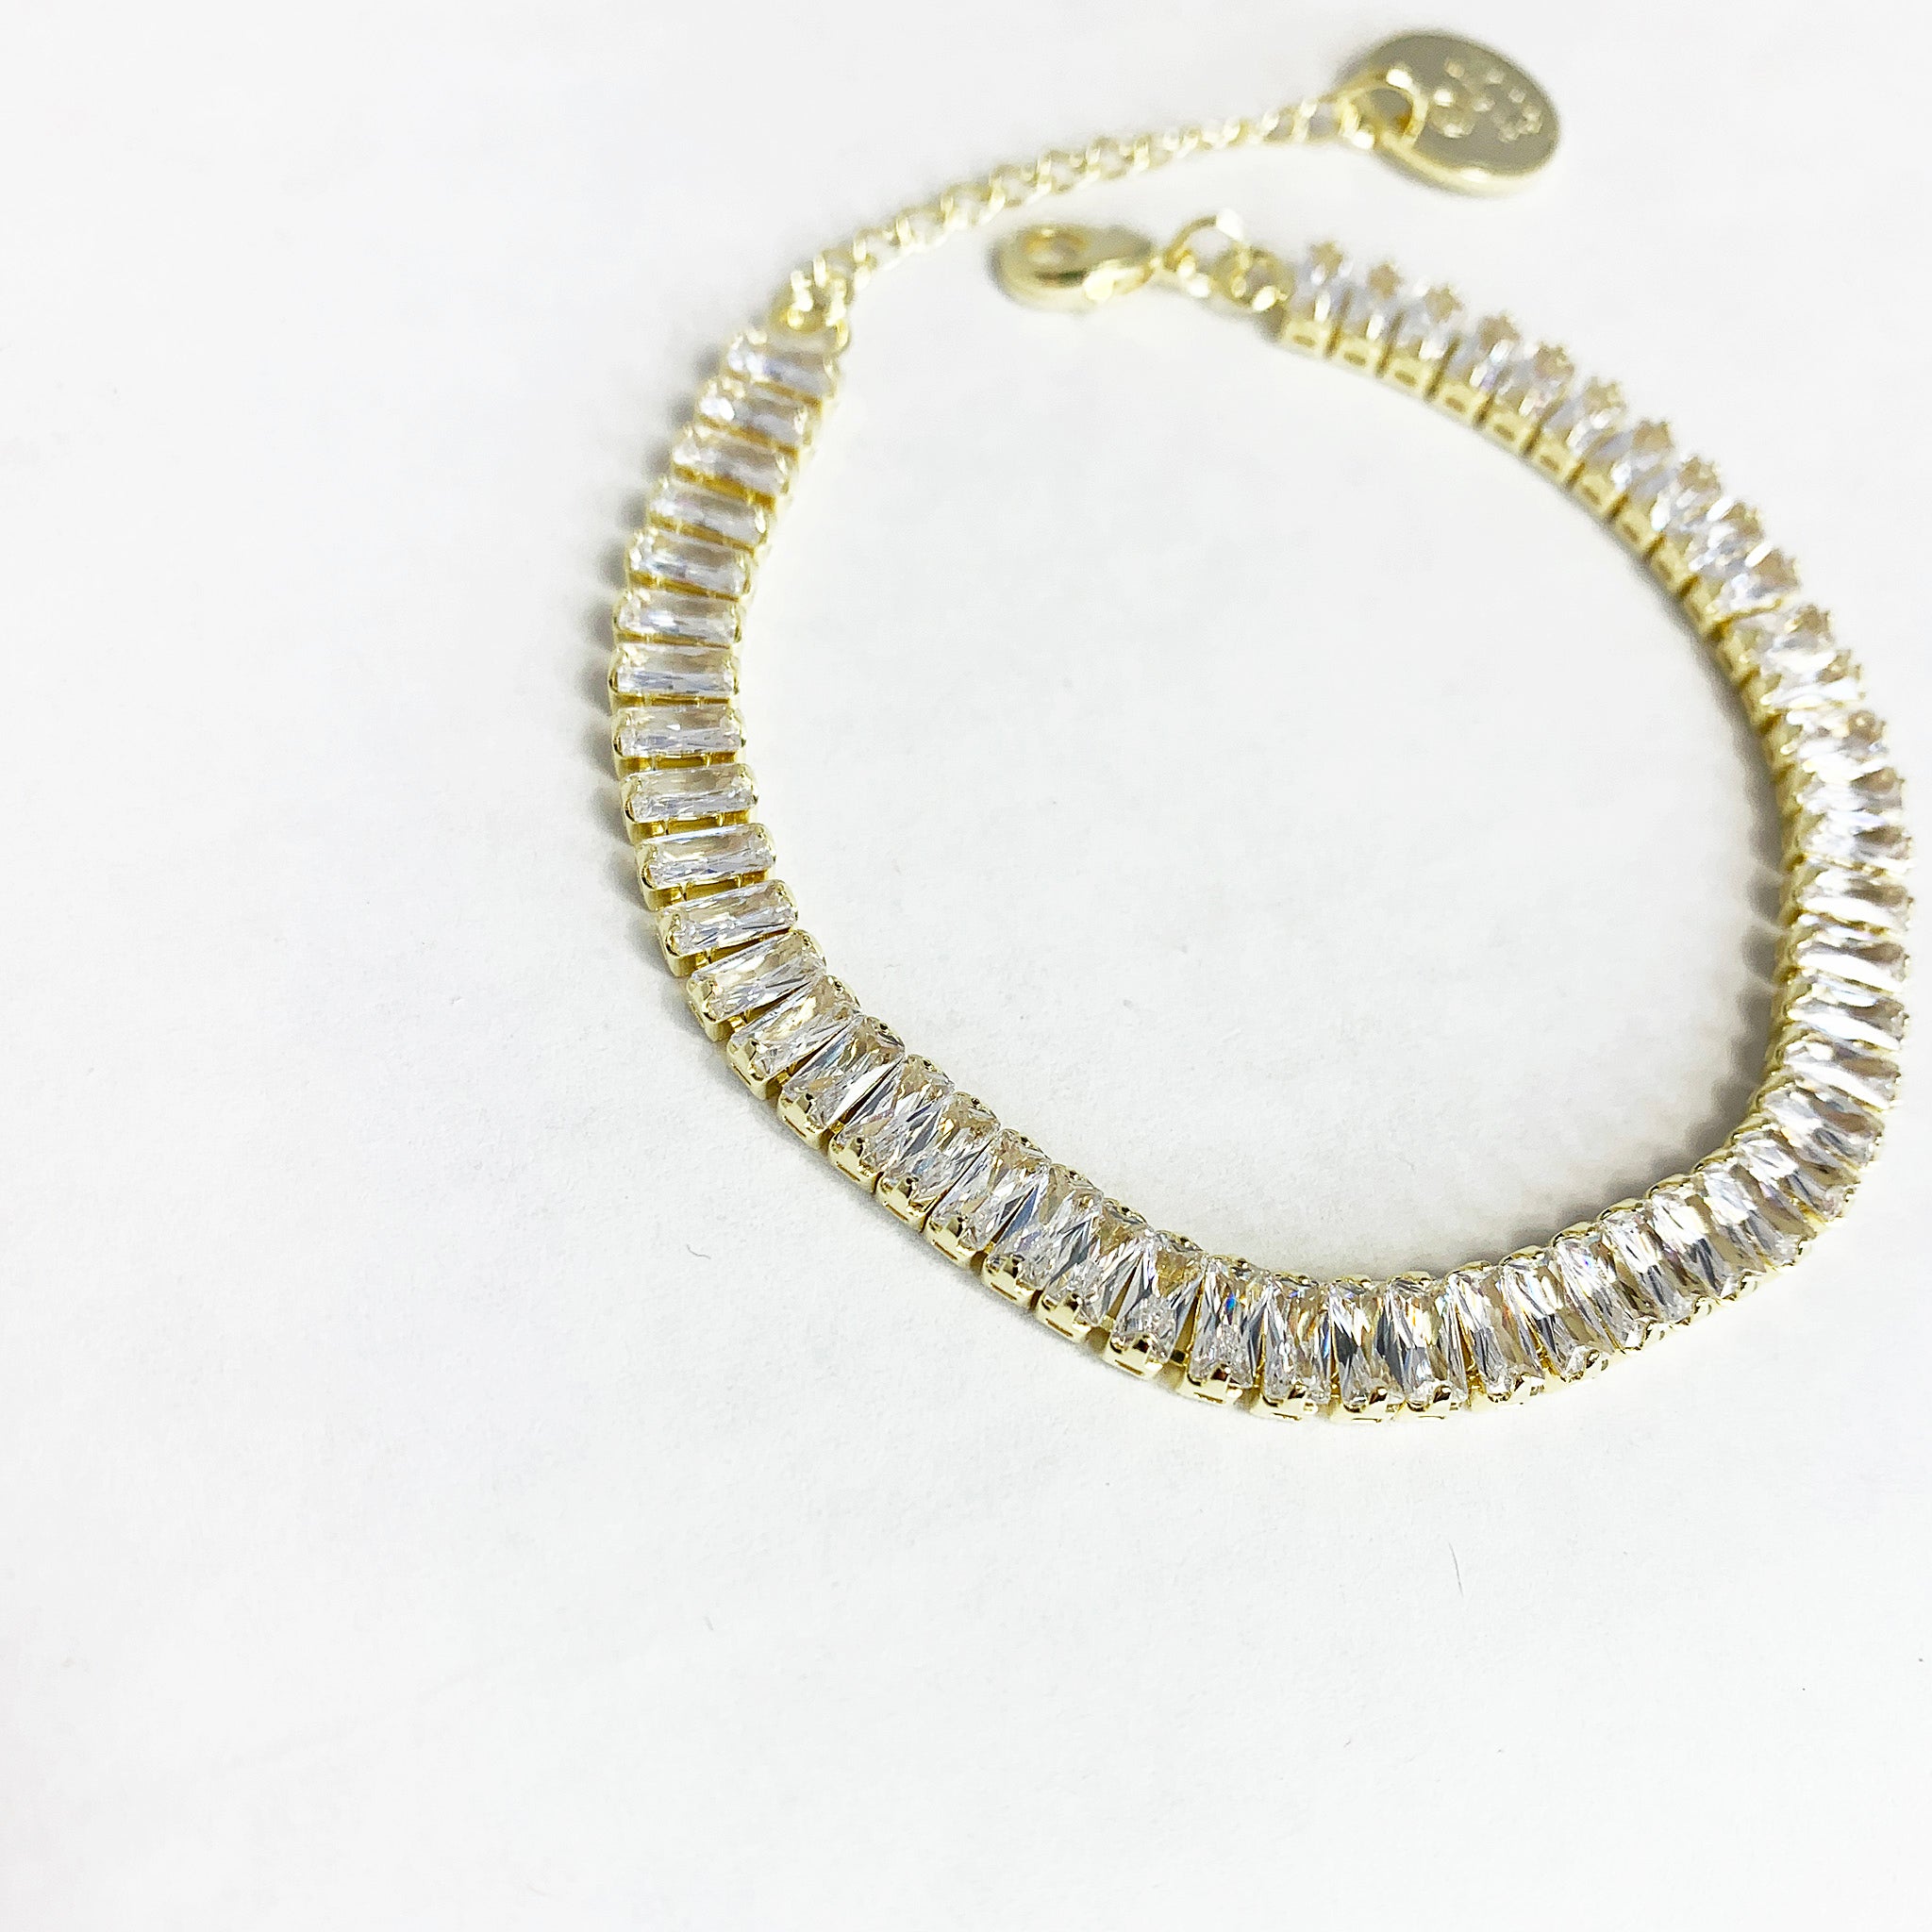 Sheila Fajl Bettina Tennis Bracelet in Clear Cubic Zirconia and Gold Plated